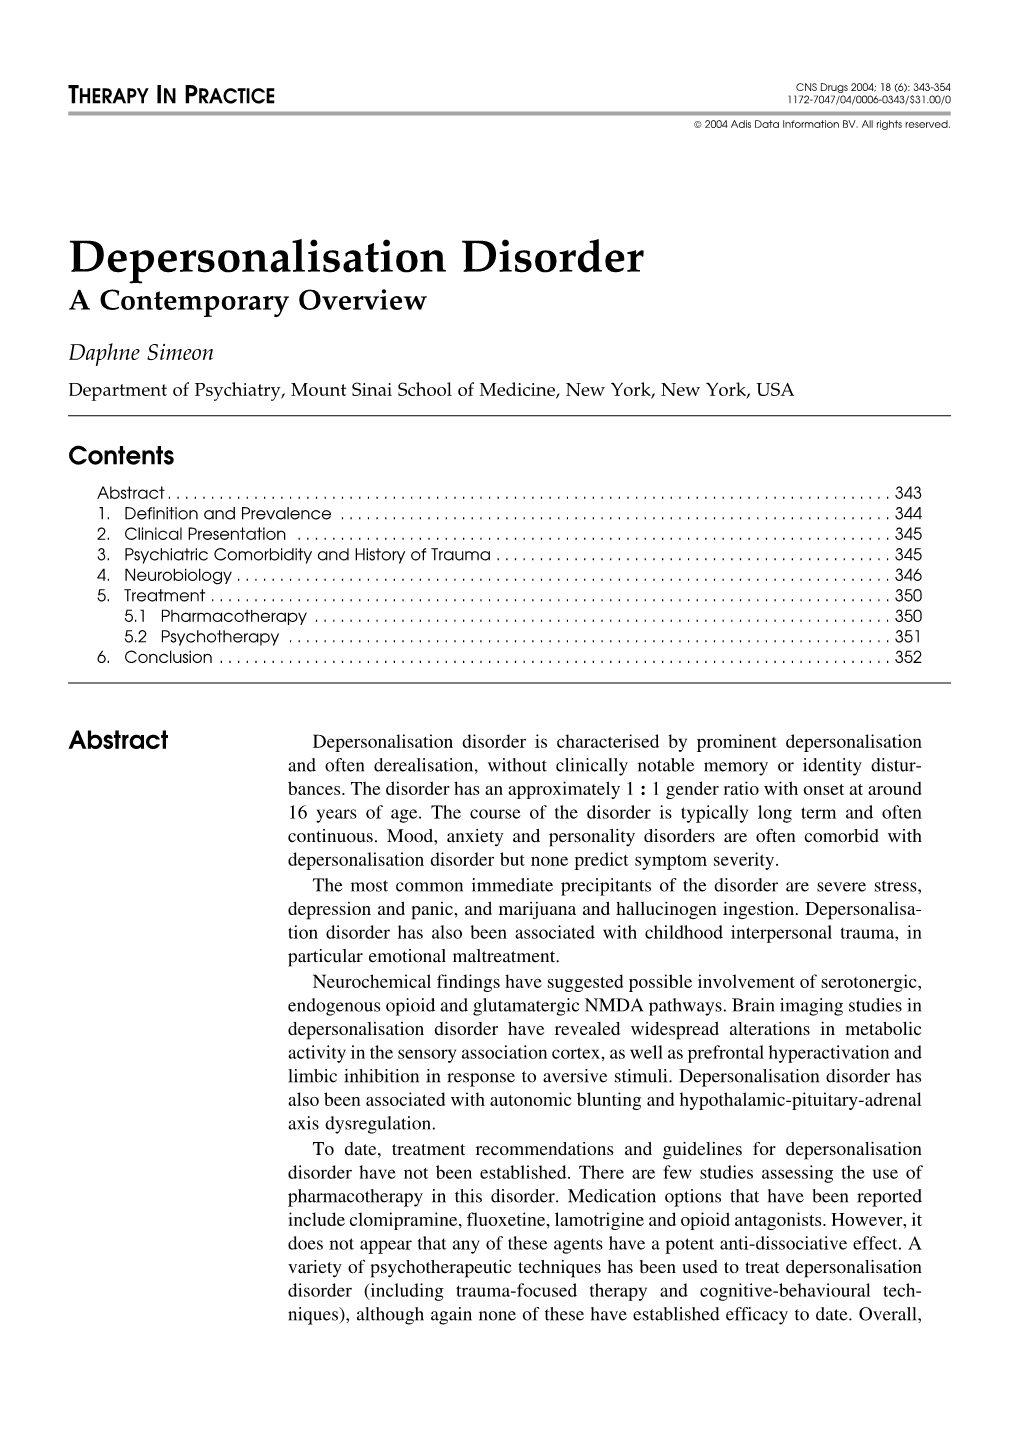 Depersonalisation Disorder a Contemporary Overview